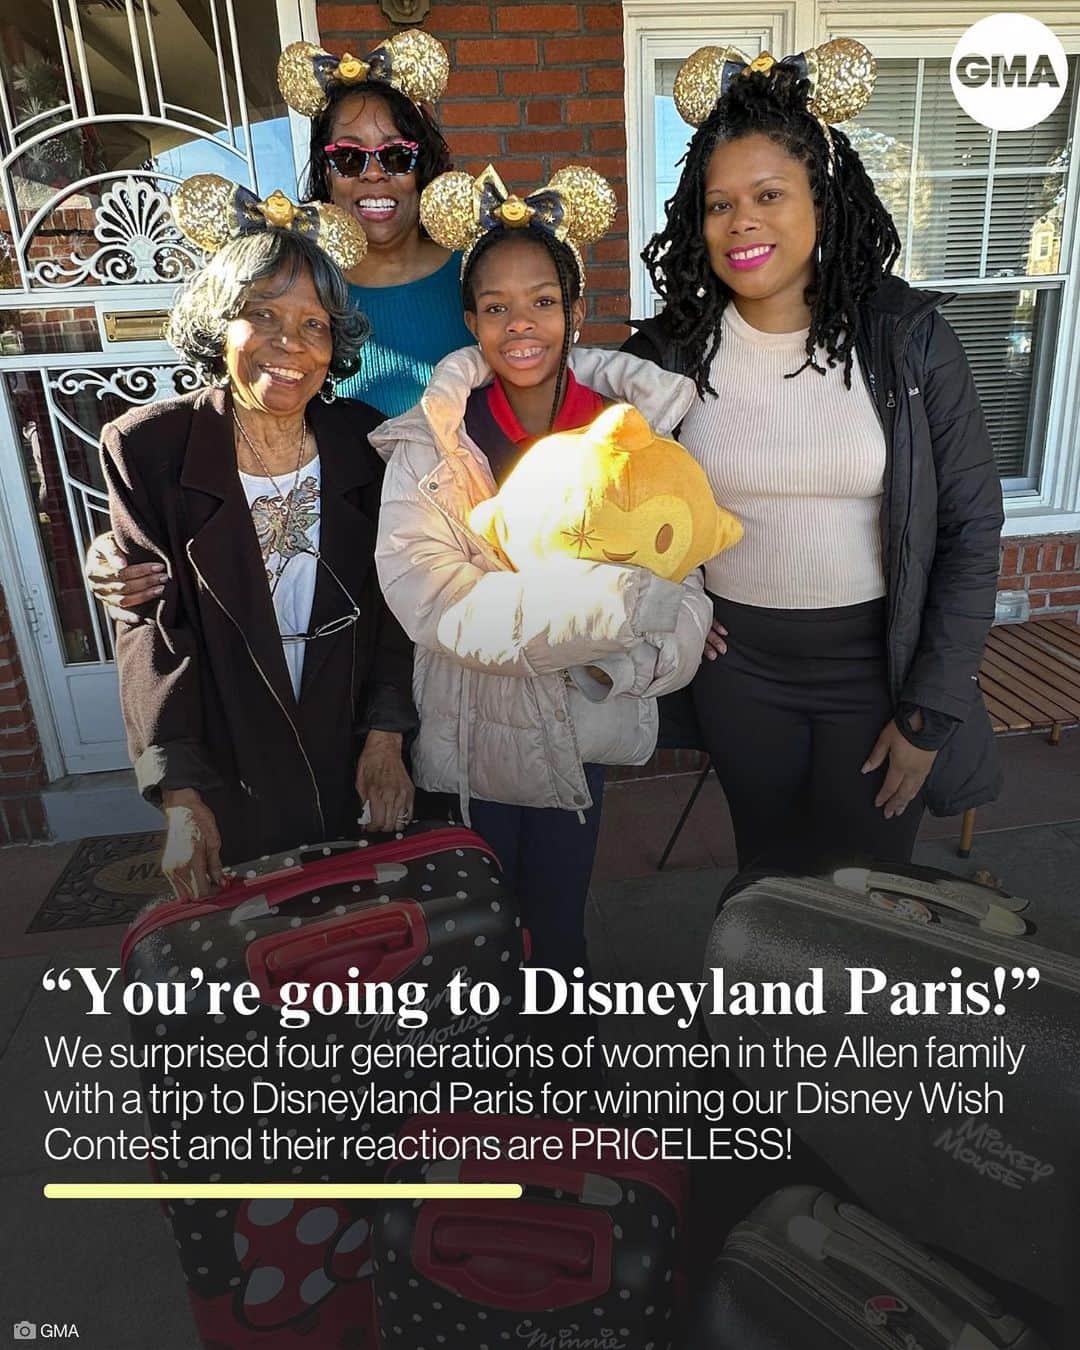 Good Morning Americaのインスタグラム：「@disneylandparis HERE THEY COME! ✨  The Allen family — four generations of women ranging in age from 92 to 12 — entered our Disney Wish contest for the chance to go to Disneyland Paris.   This morning @demarcomorgan surprised them at their home in Philadelphia to tell them they won and are headed to Paris TONIGHT!   Congratulations Allen family! Check out our link in bio for the full surprise.」